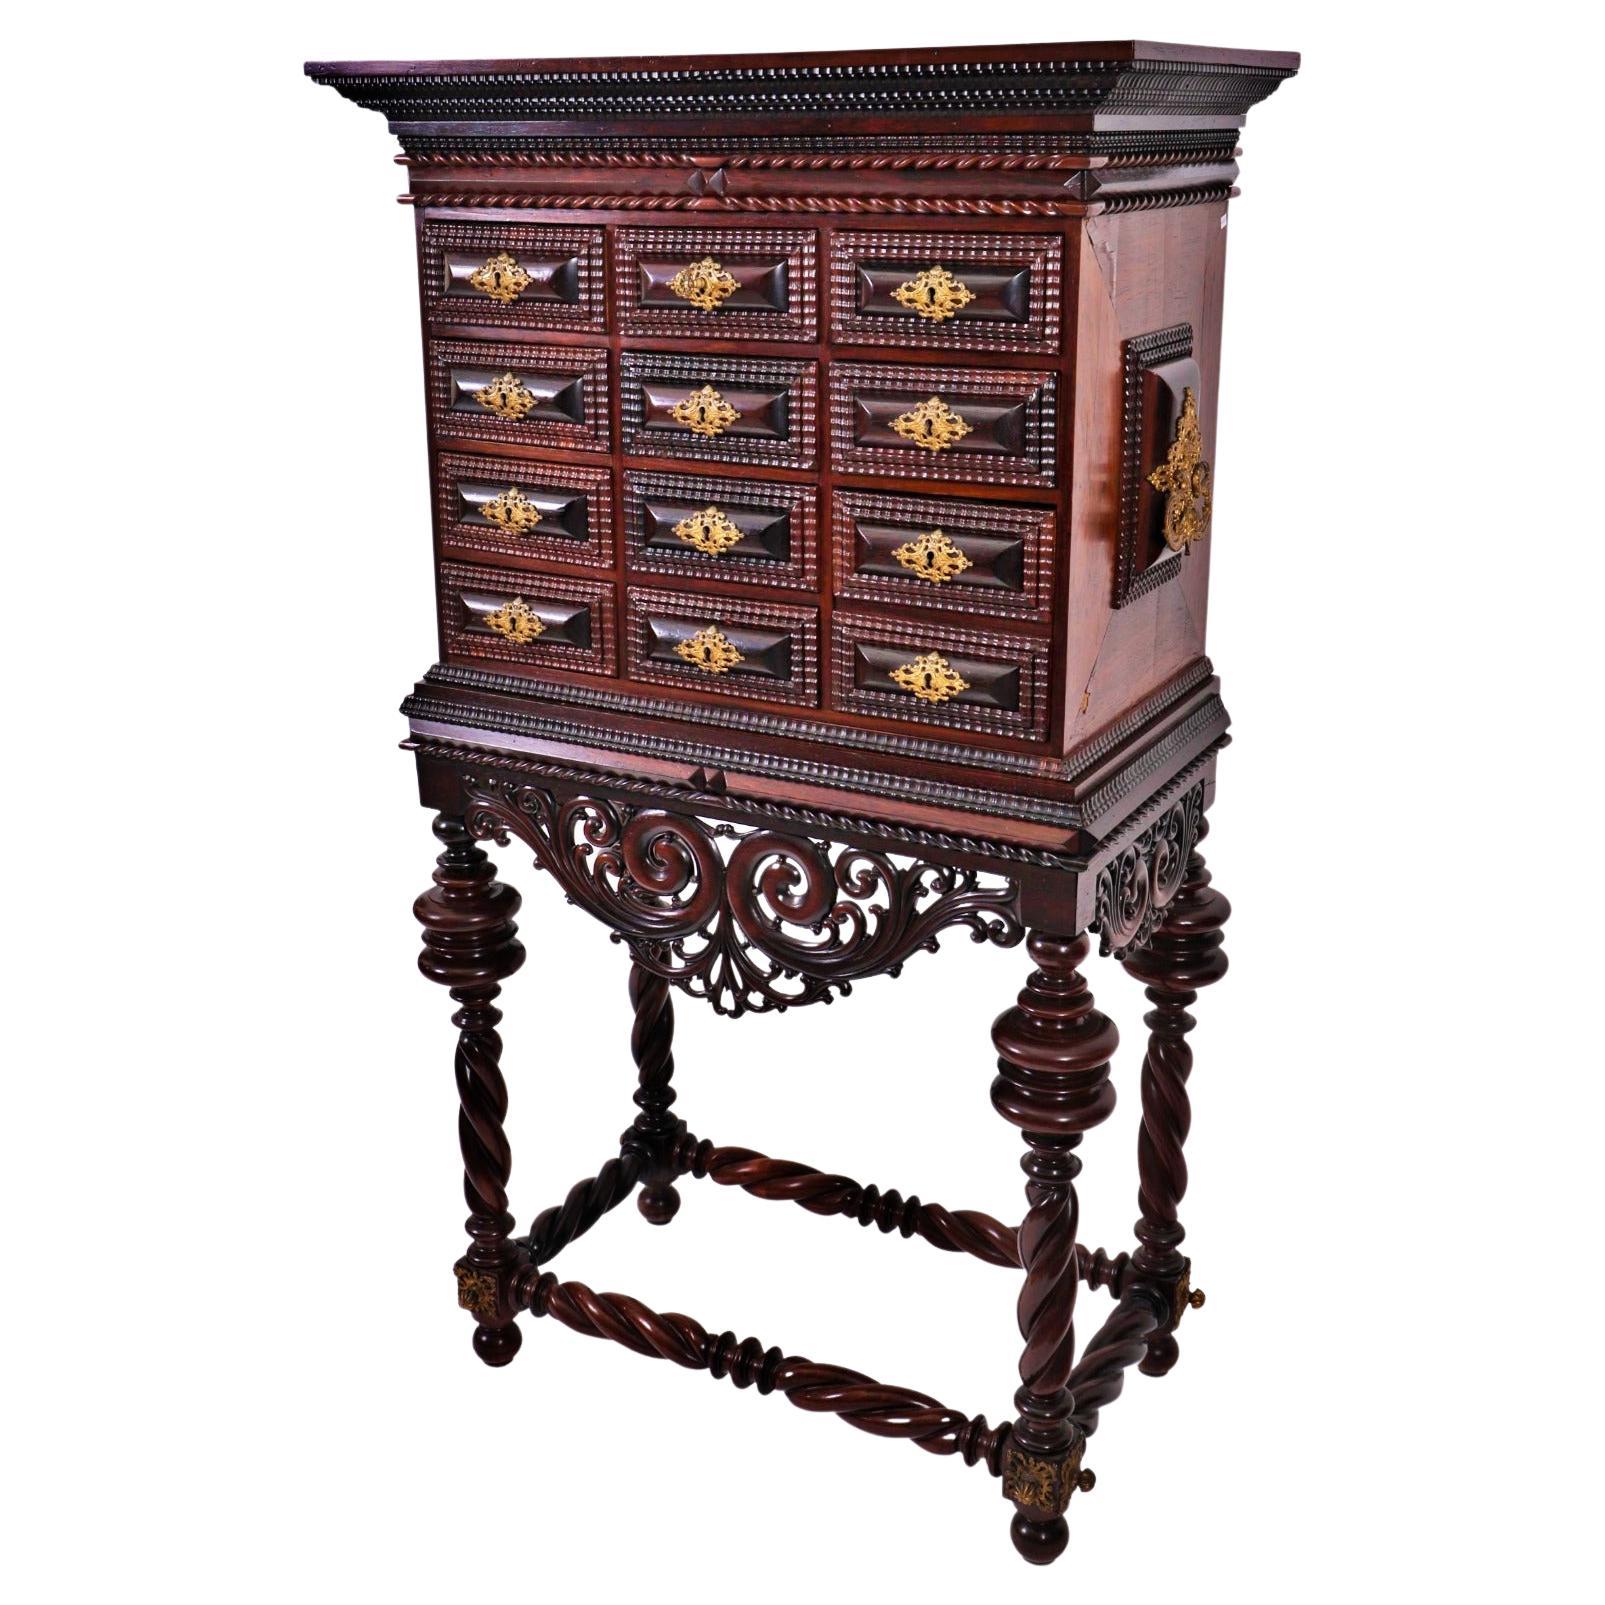 Important Portuguese Counter with trimmer 19th century
Brazilian rosewood and Brazilian rosewood veneer, architecturally shaped with protruding cymbal, chest with eleven drawers simulating twelve, padded drawer fronts, shaky friezes, cut and cut